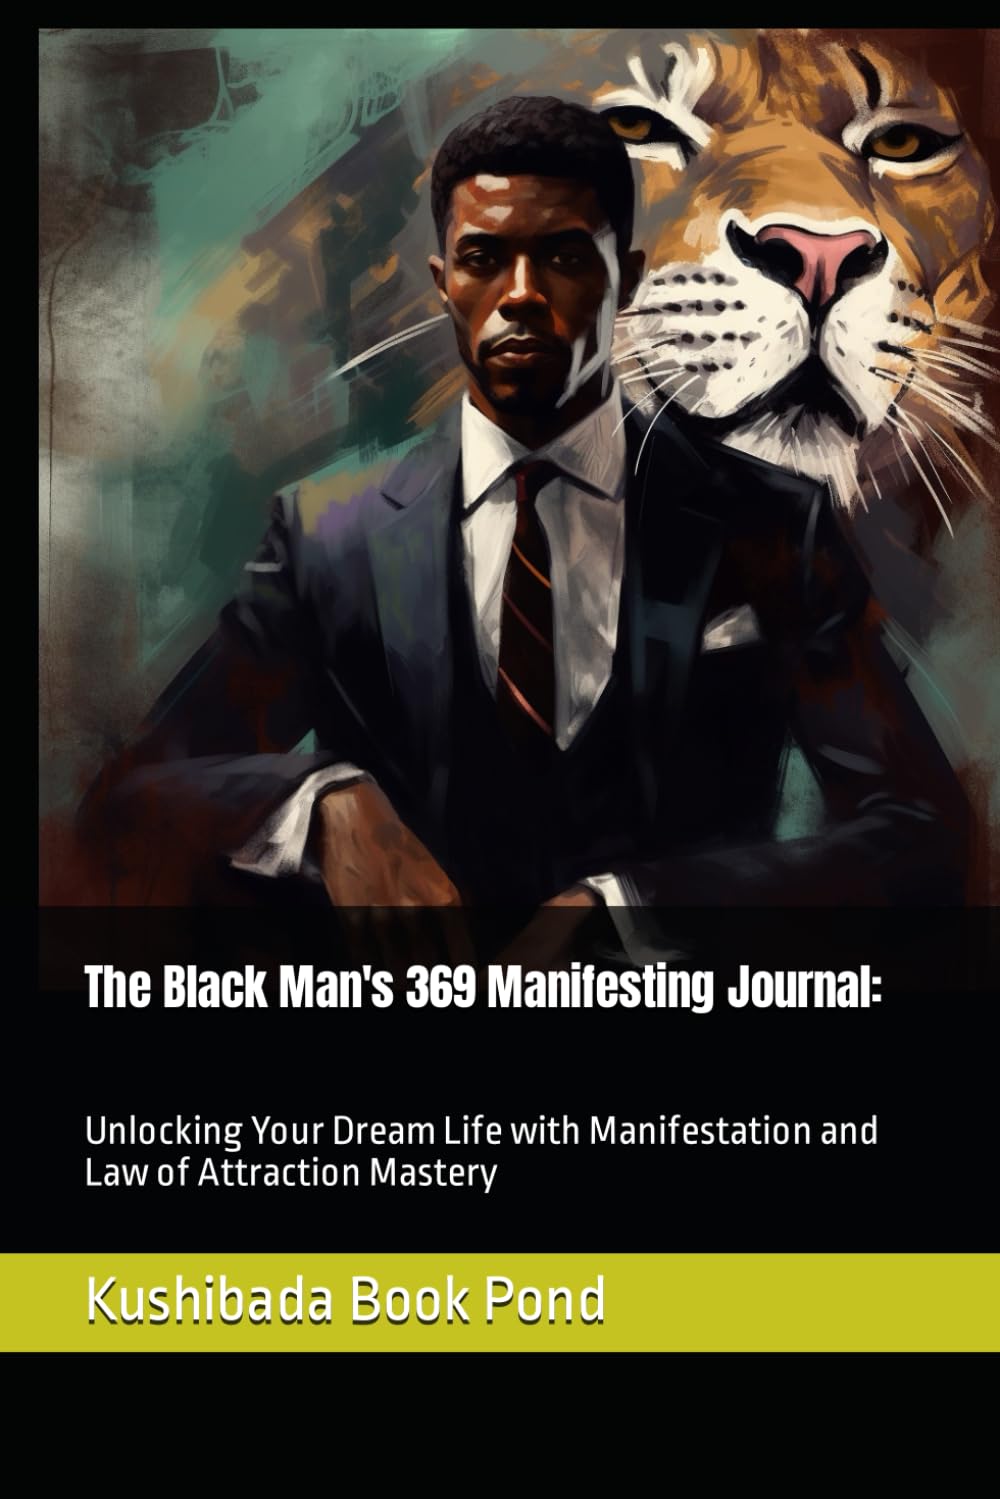 The Black Man's 369 Manifesting Journal:: Unlocking Your Dream Life with Manifestation and Law of Attraction Mastery